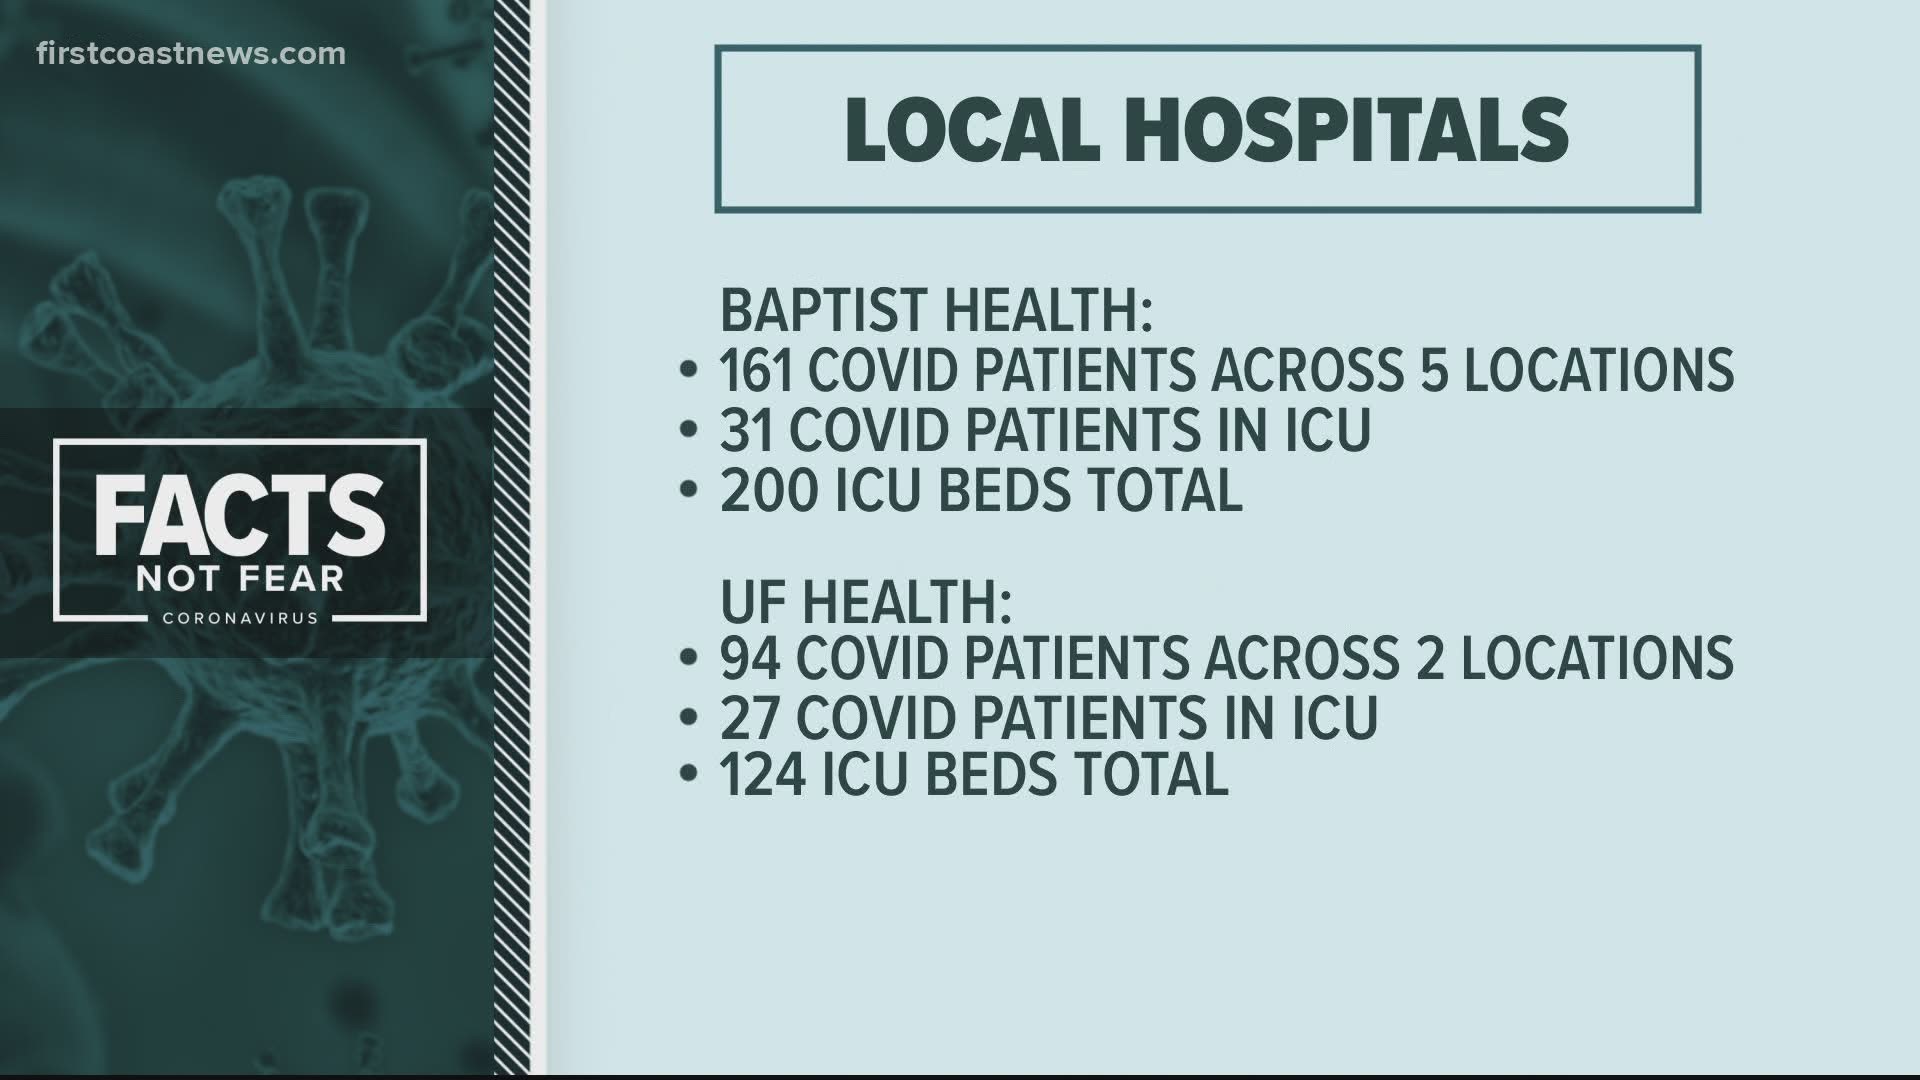 As of Sunday, July 12, Baptist Health currently has 161 COVID-19-related patients in its five hospitals. Thirty-one of those patients are in the ICU.